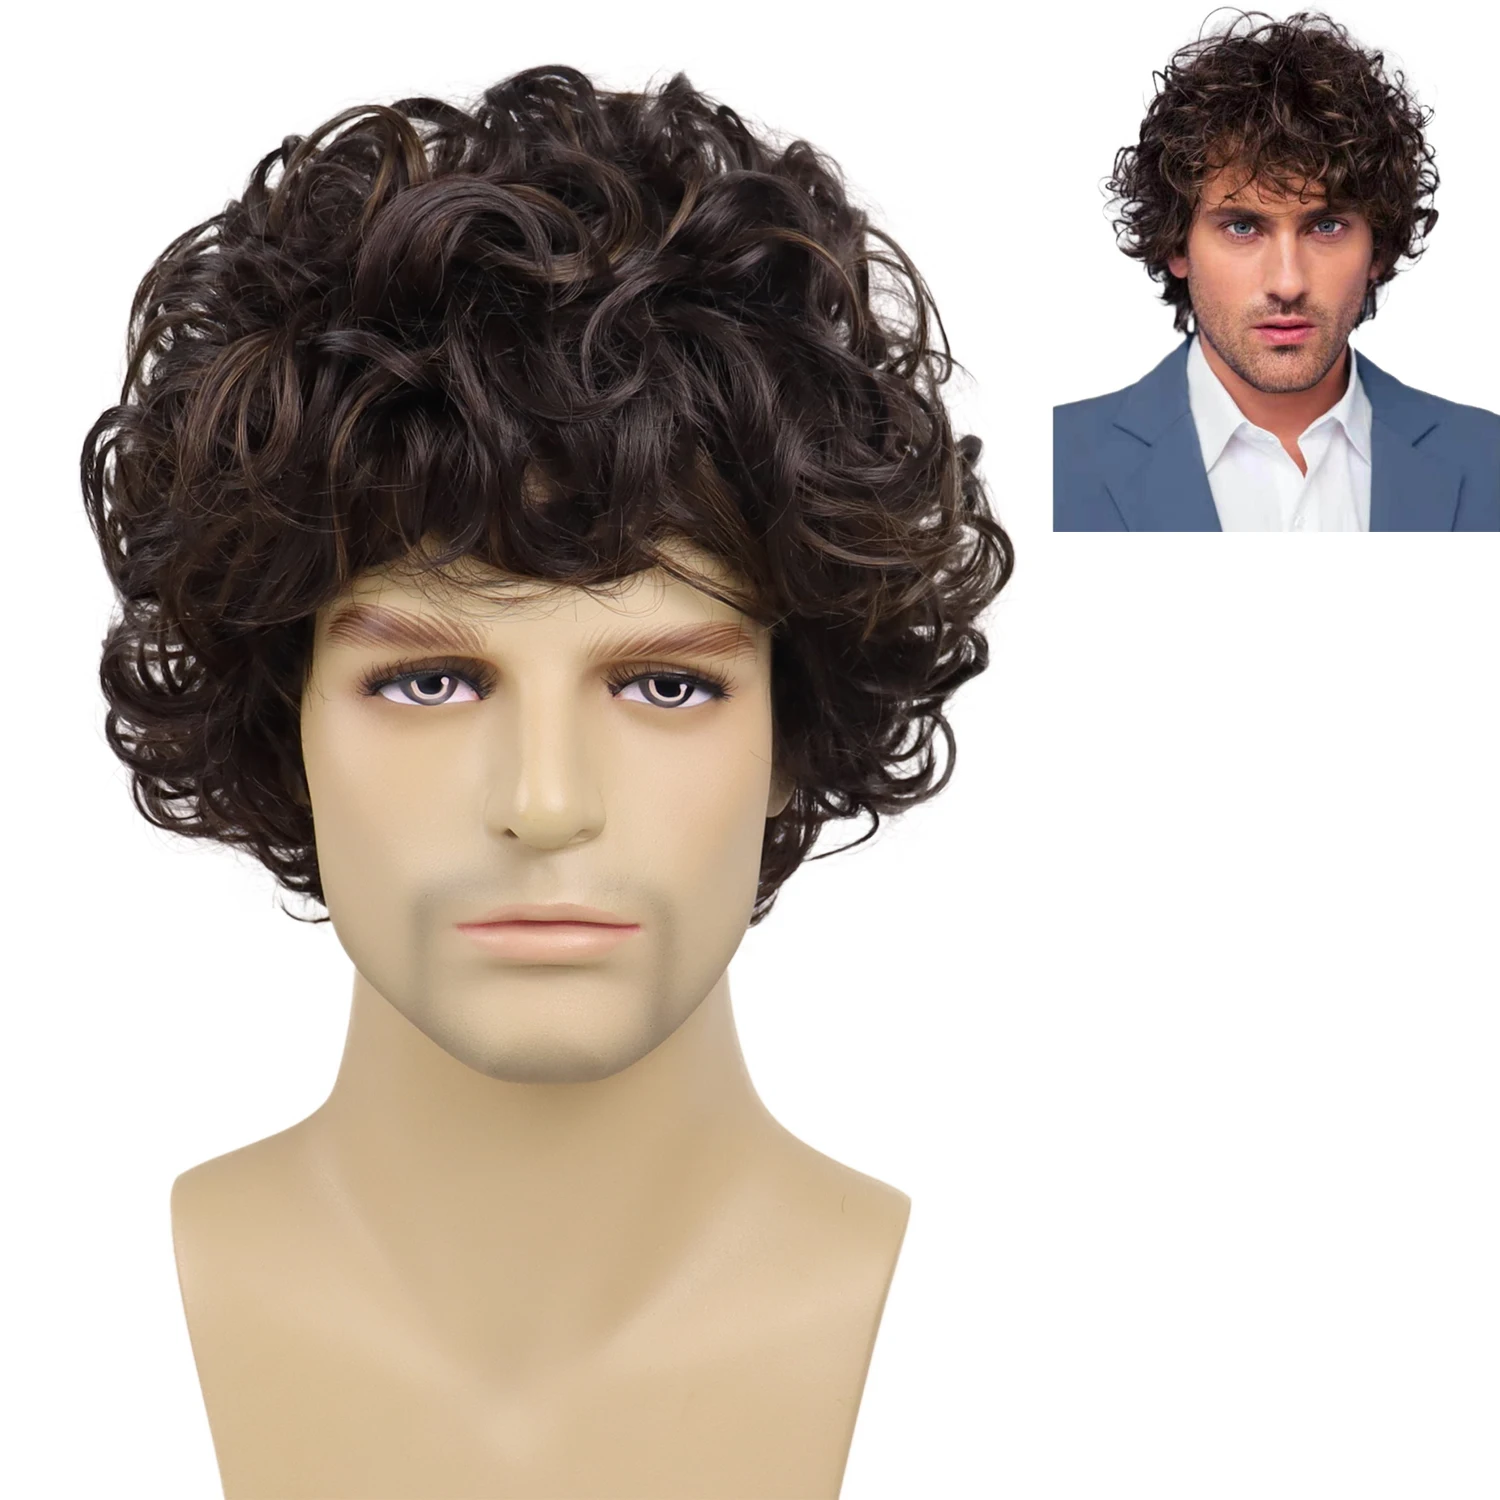 

GNIMEGIL Synthetic Hair Mens Wig Short Big Curly Hairstyles 80s Cosplay Wig for Man Natural Wigs for Black Men Halloween Costume